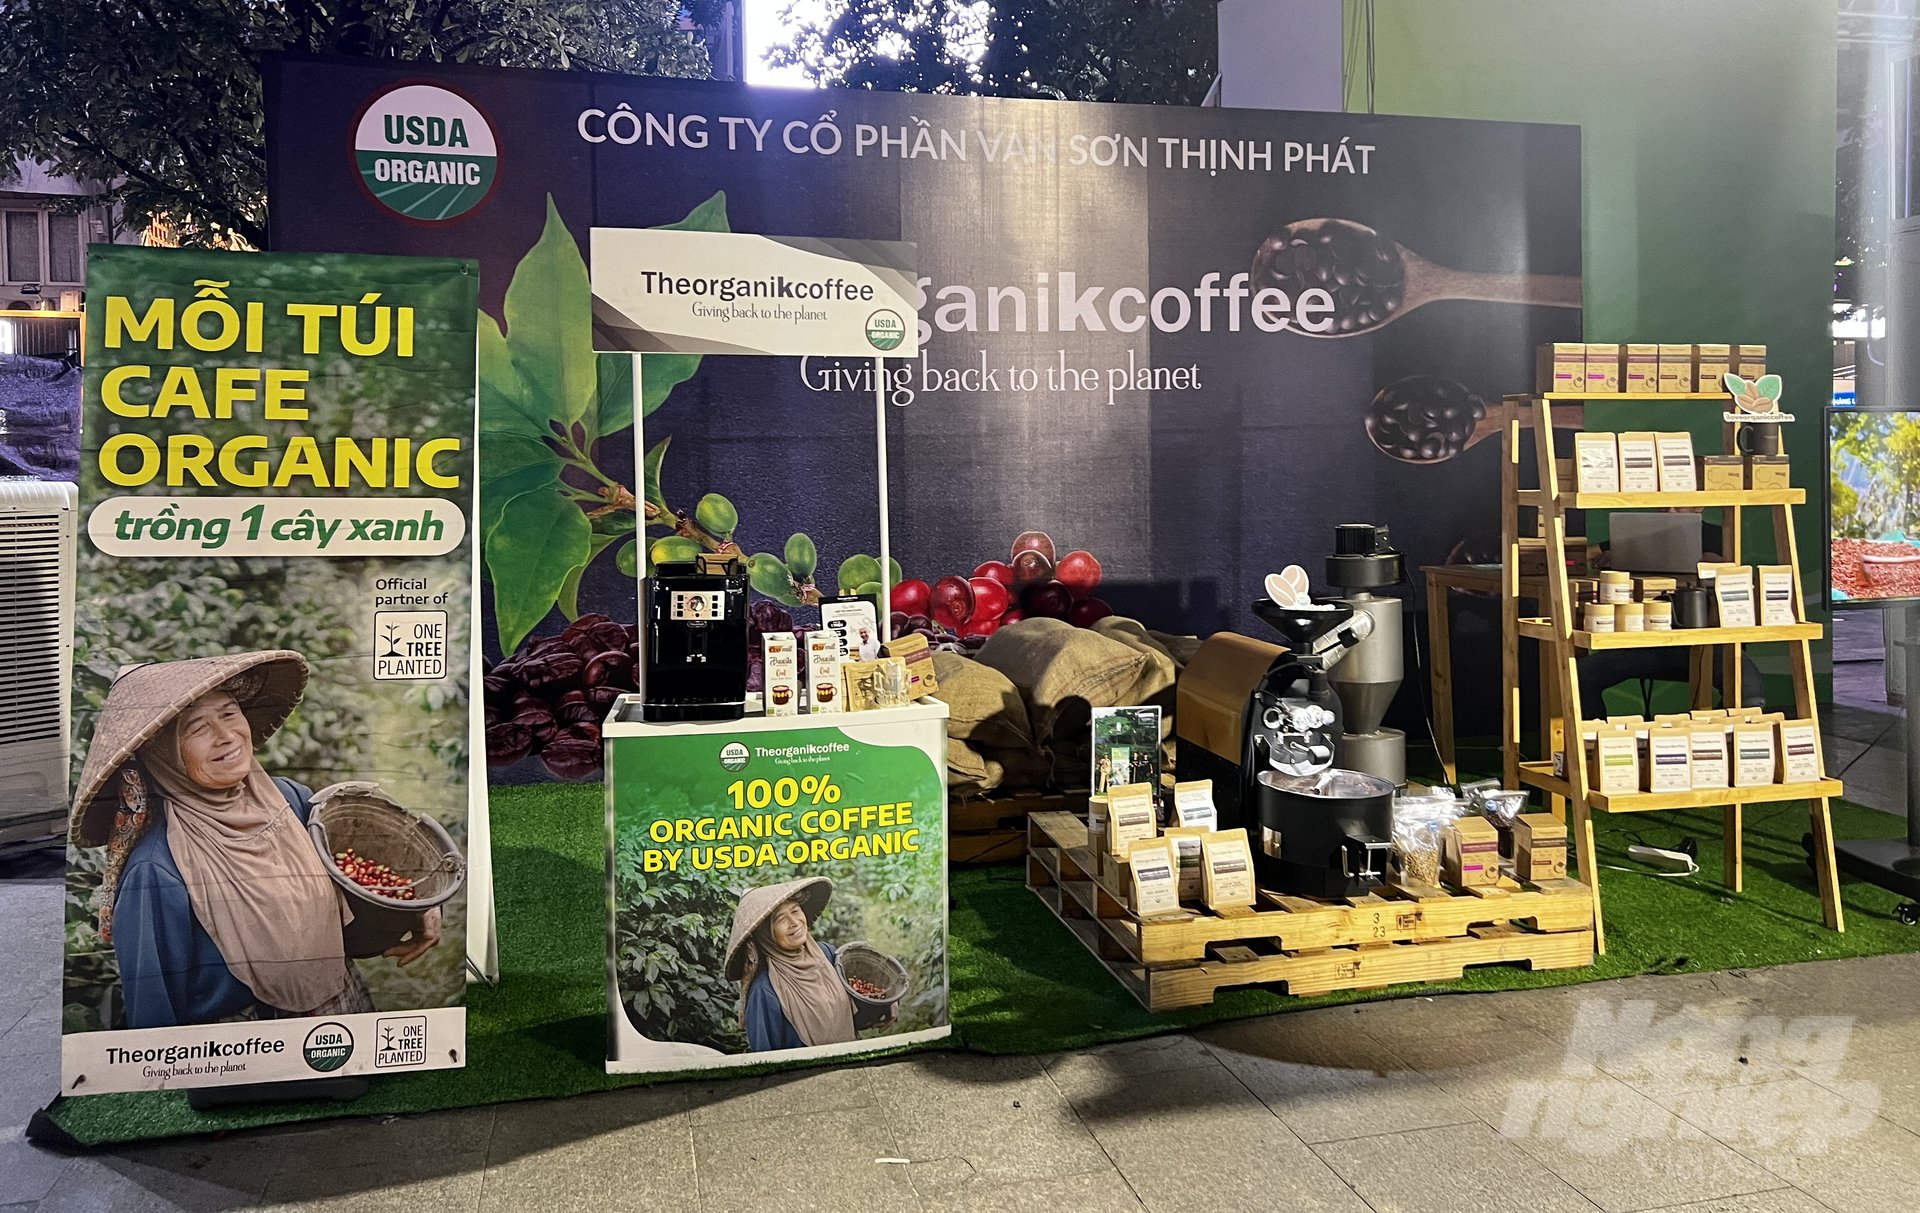 The booth displaying at the Green Growth Products and Services Exhibition space (Nguyen Hue Street, District 1) within the framework of HEF 2023. Photo: Nguyen Thuy.